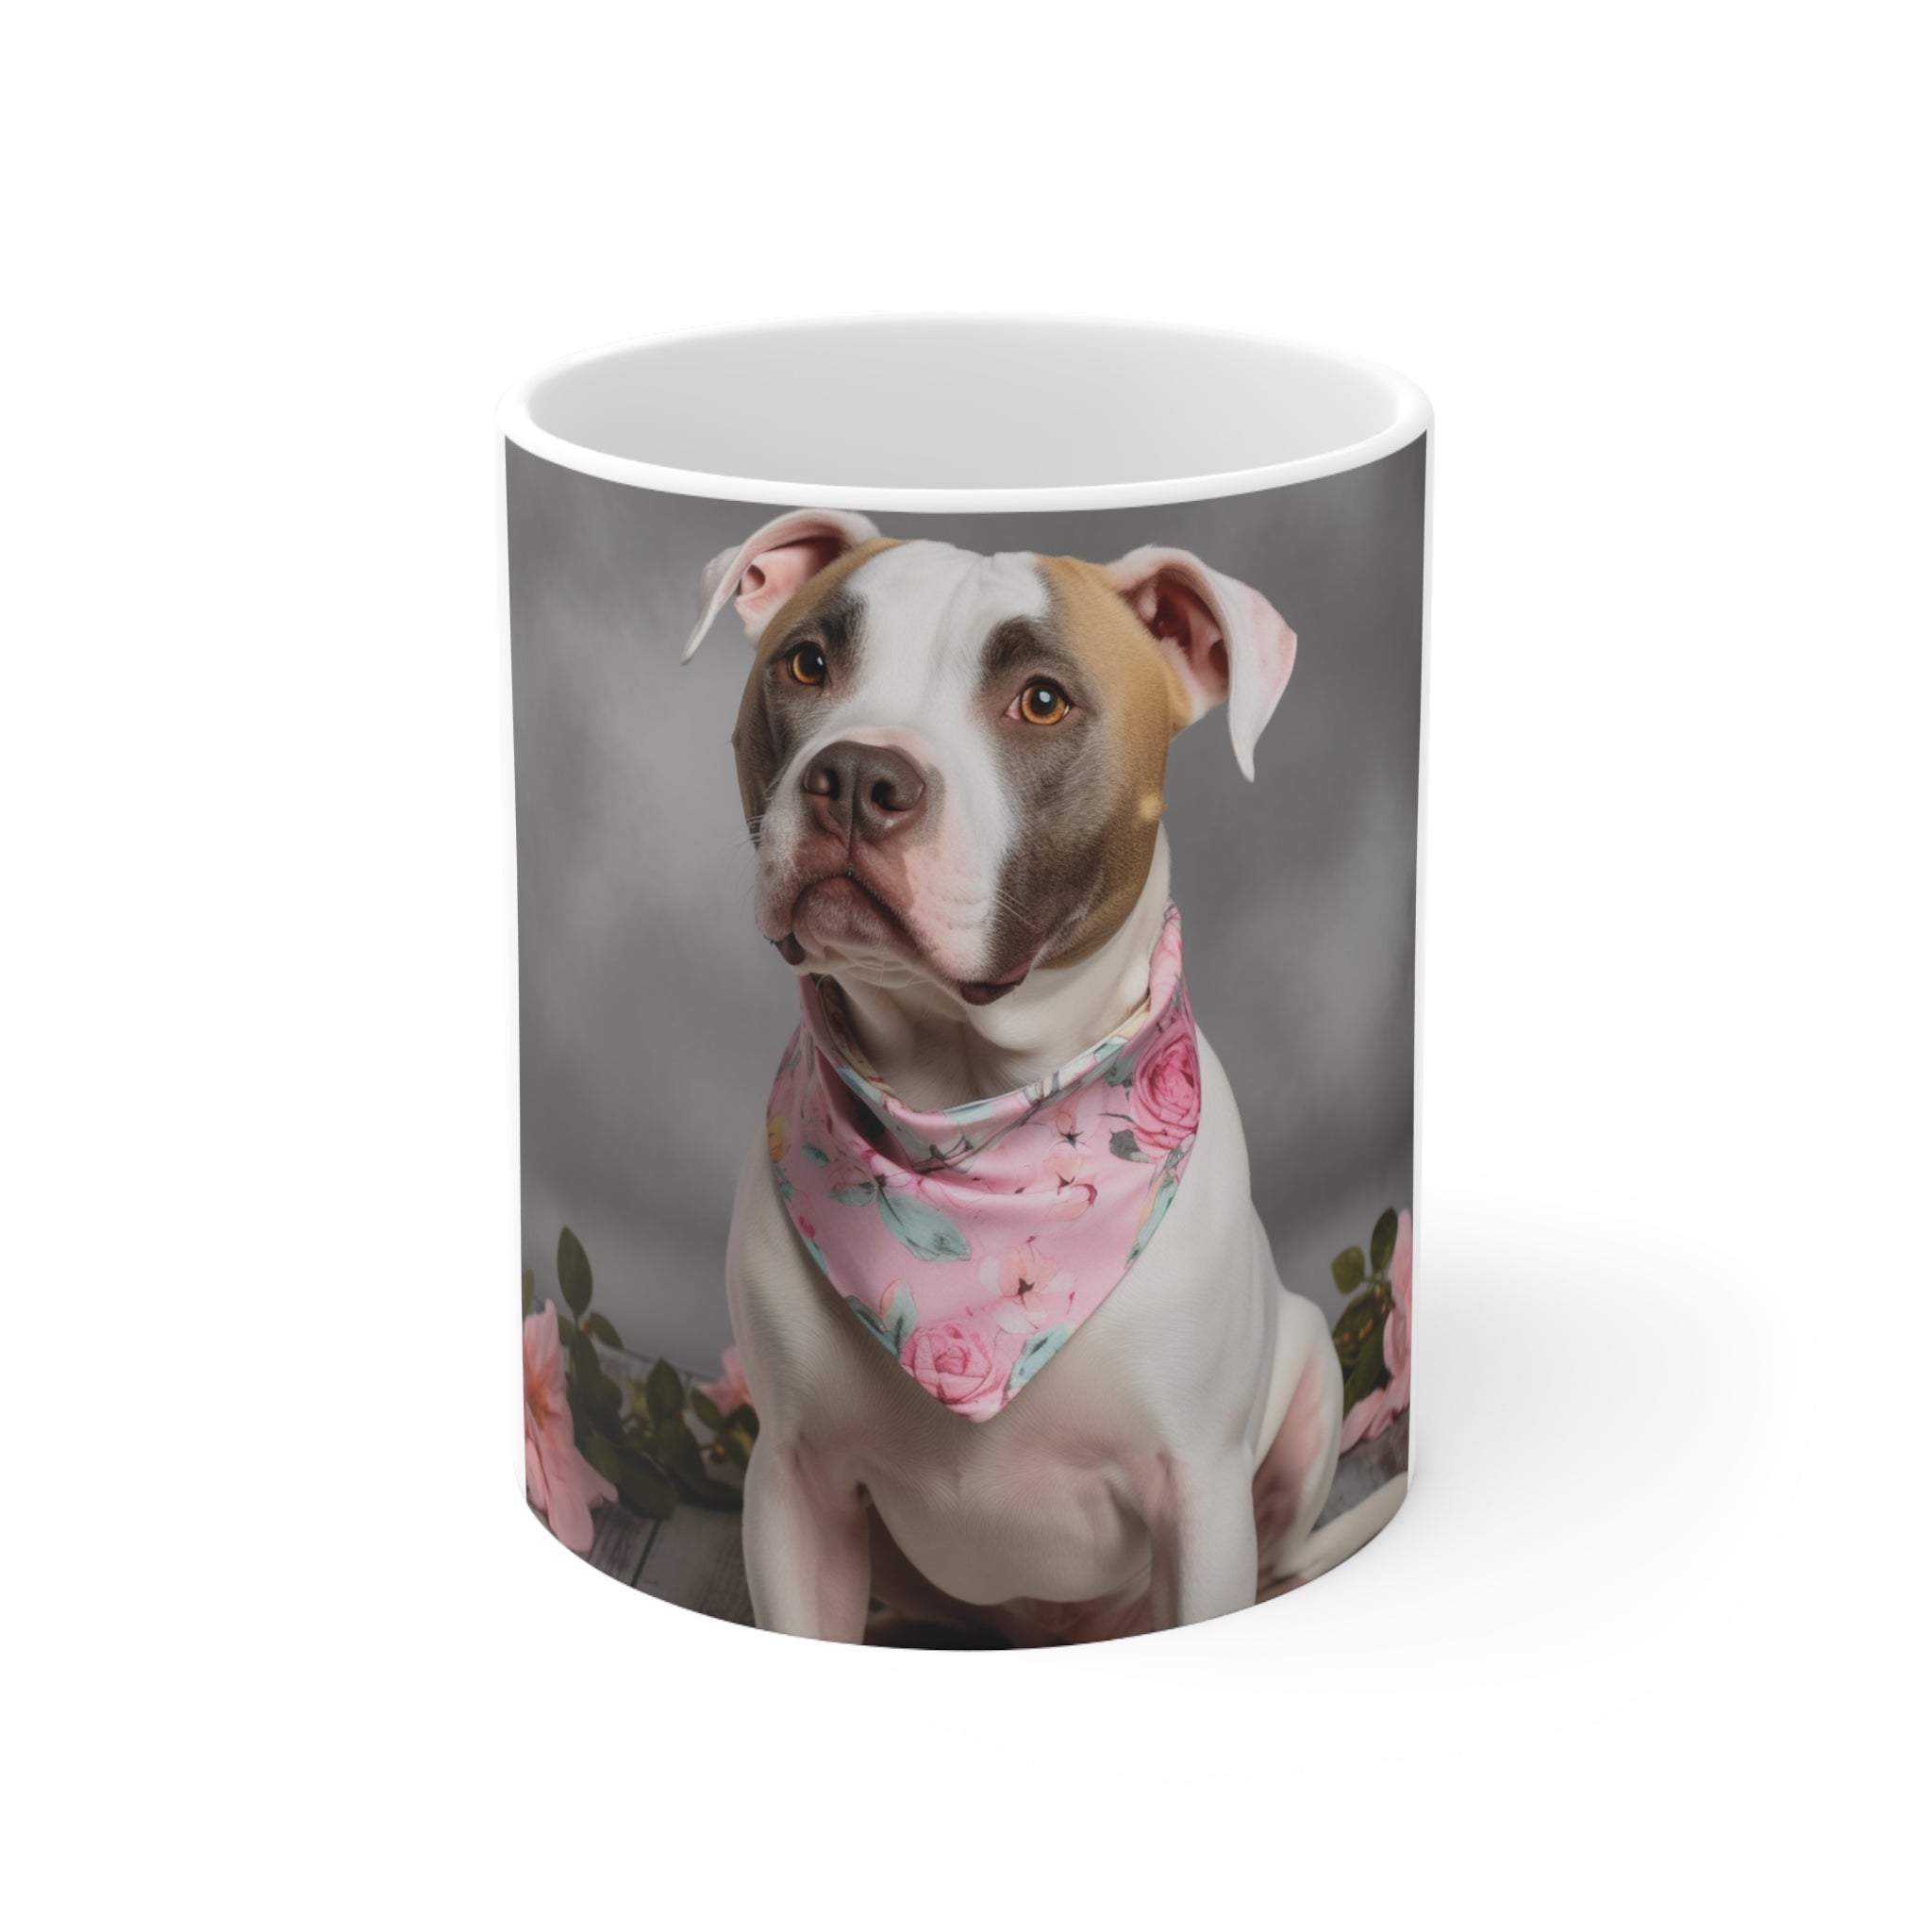 🐶 Furry Pitt Friend Dog Photo Ceramic Mug 11oz - Personalized Pet Mug for Dog Lovers | Cherish Your Canine Companion with Every Sip for Dog Owners